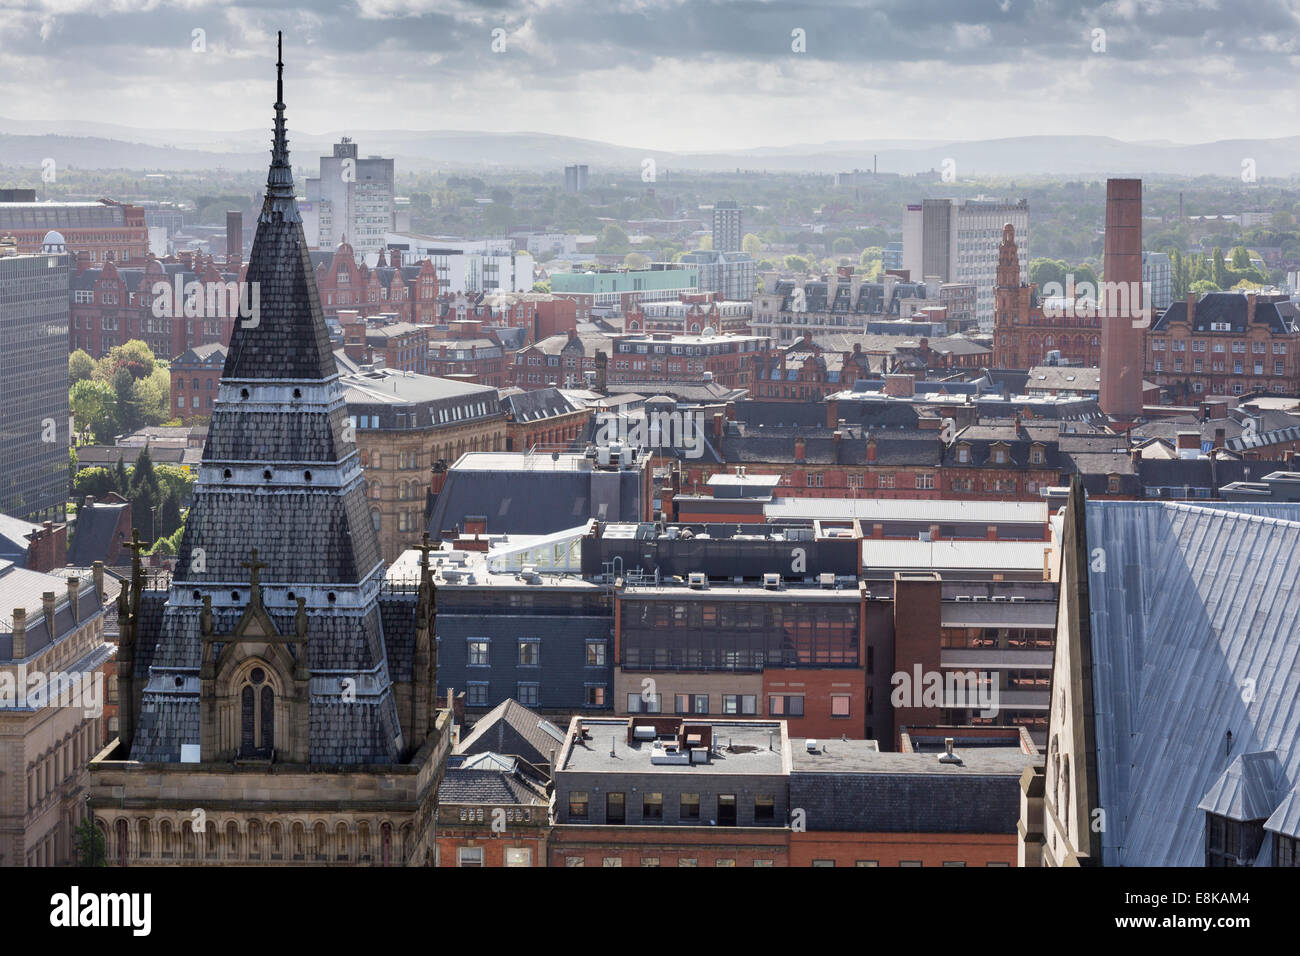 Vues de l'srooftops forme Manchester Manchester Town Hall clock tower Banque D'Images